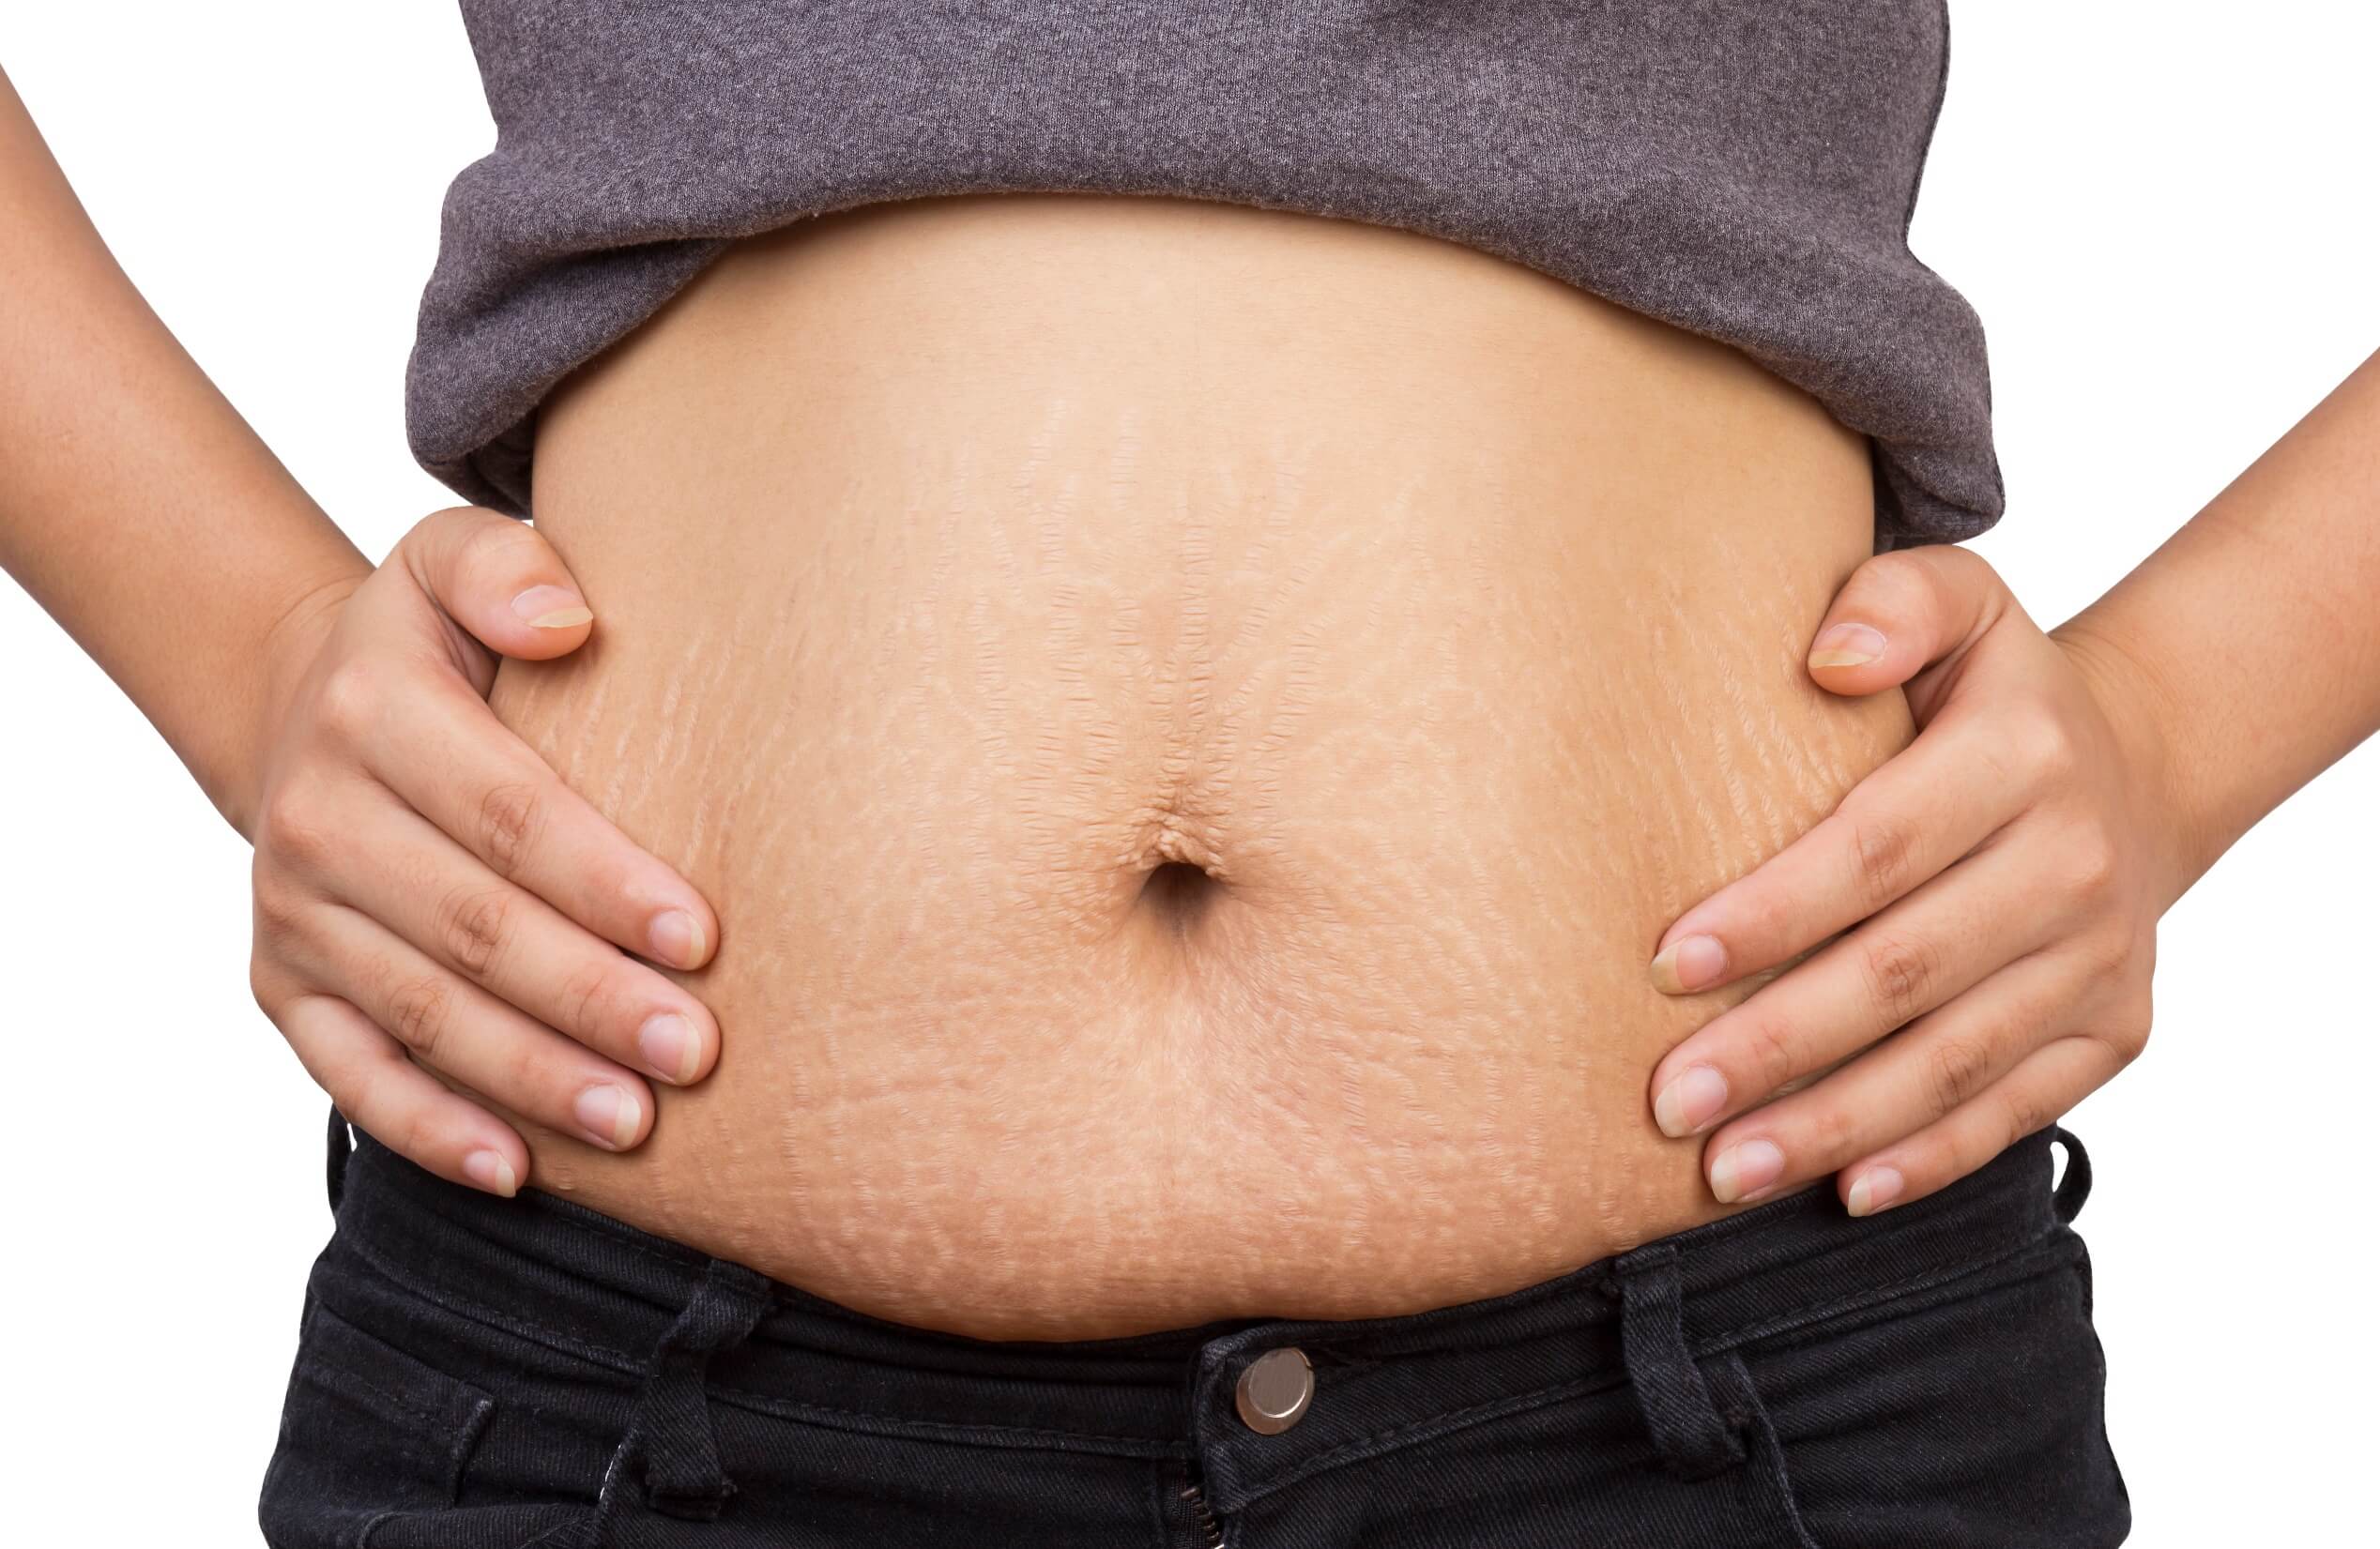 Woman's tummy with stretchmarks posing with her hands over hips